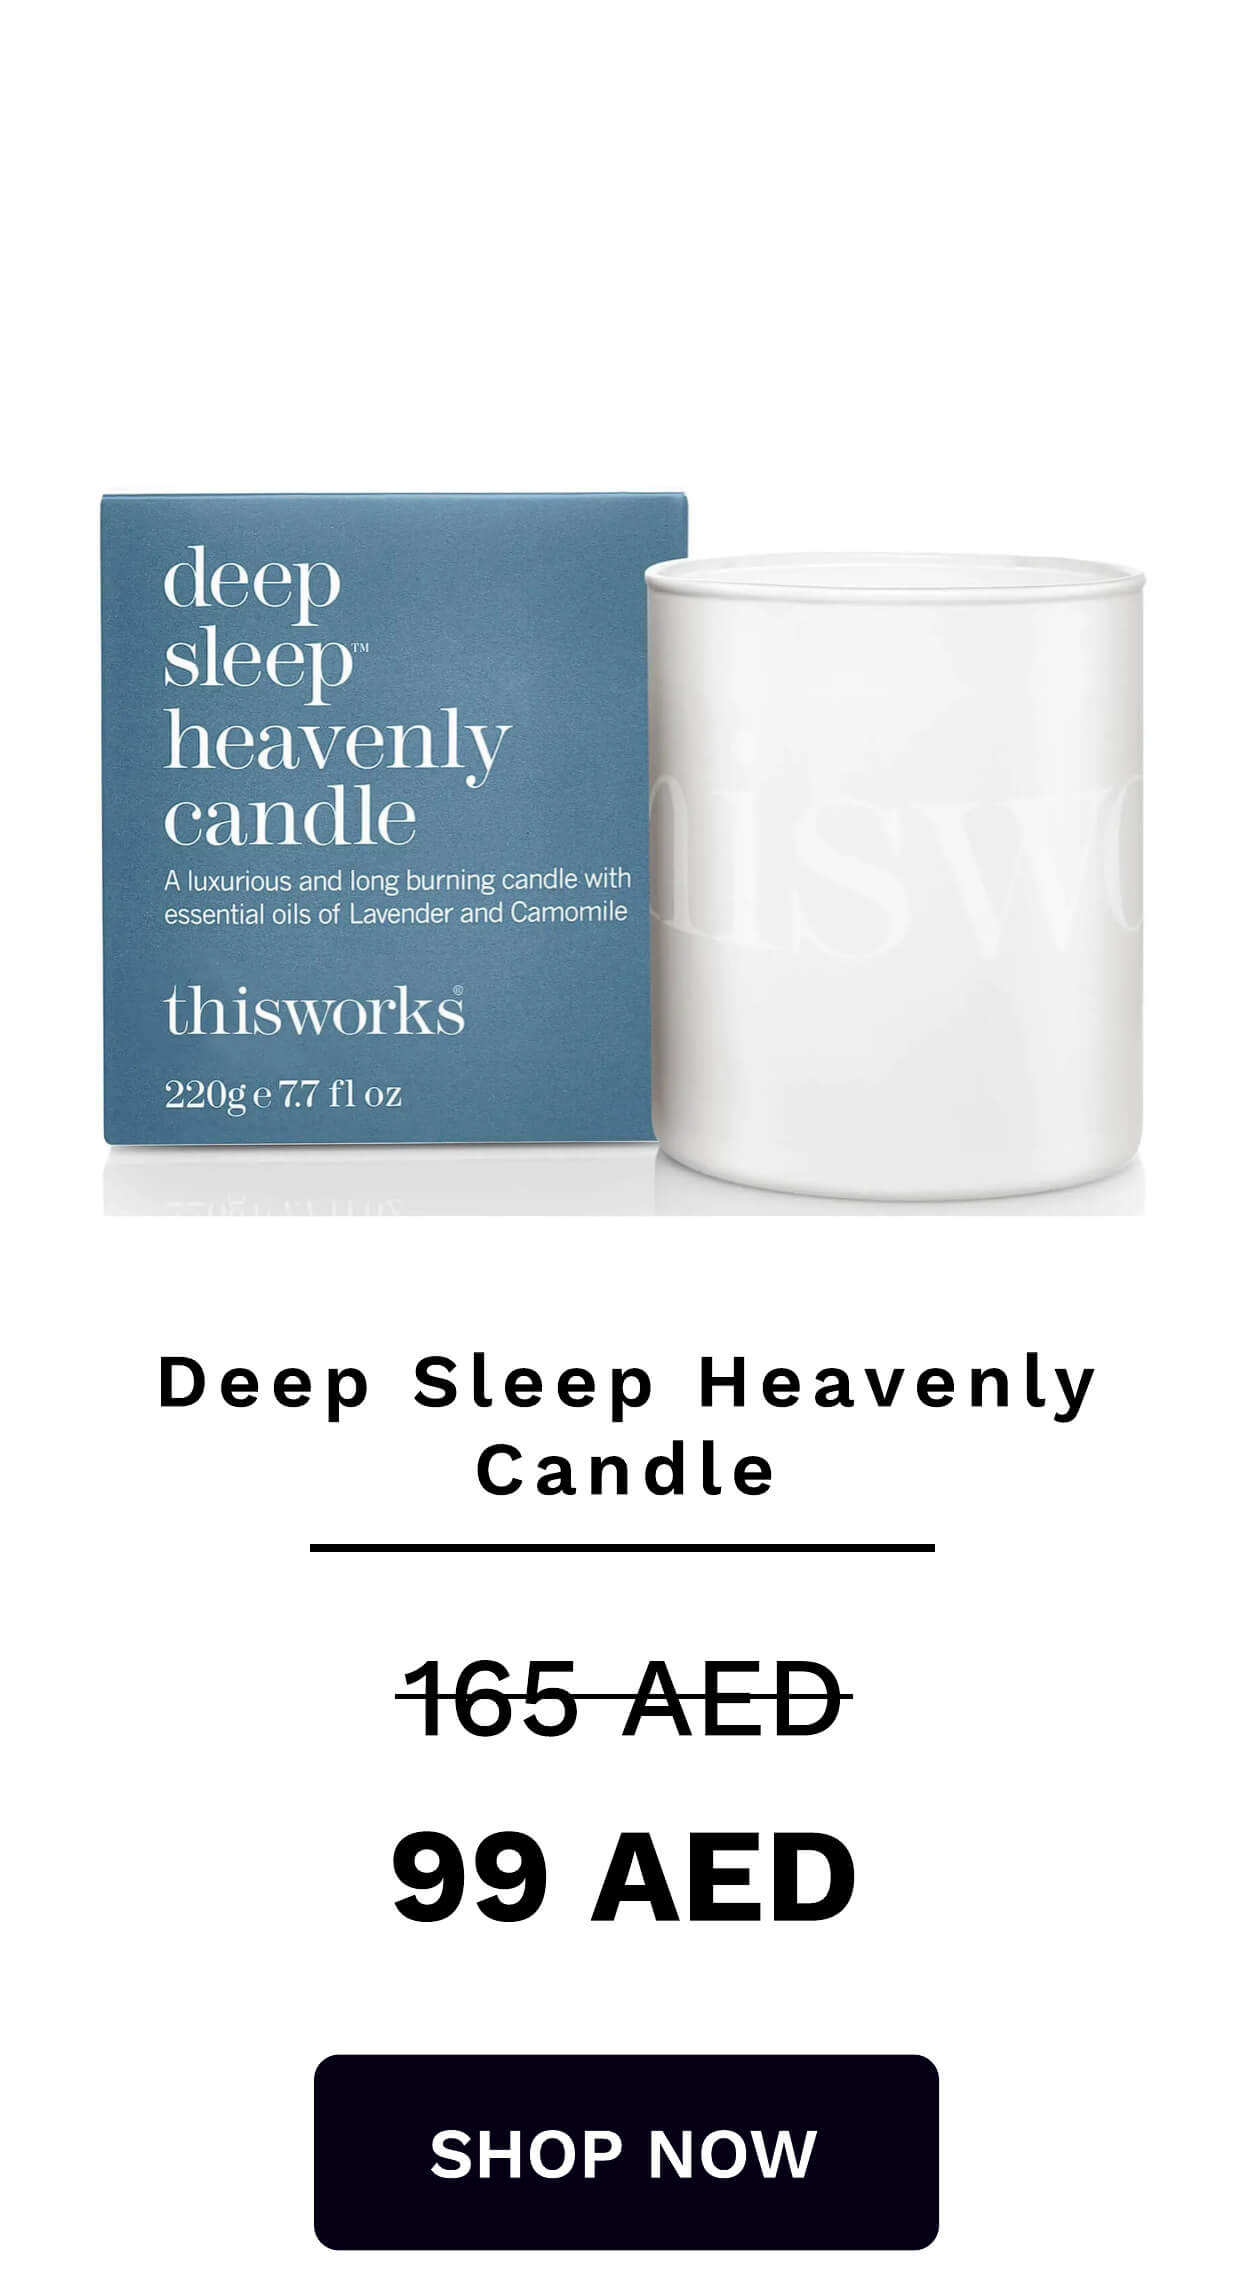 deep sleepr JaTeAY 1010y candle A luxurious and long burning candle with essential oils of Lavender and Camomile thisworks 220ge7.7 fl oz Deep Sleep Heavenly Candle 165-AED 99 AED SHOP NOW 